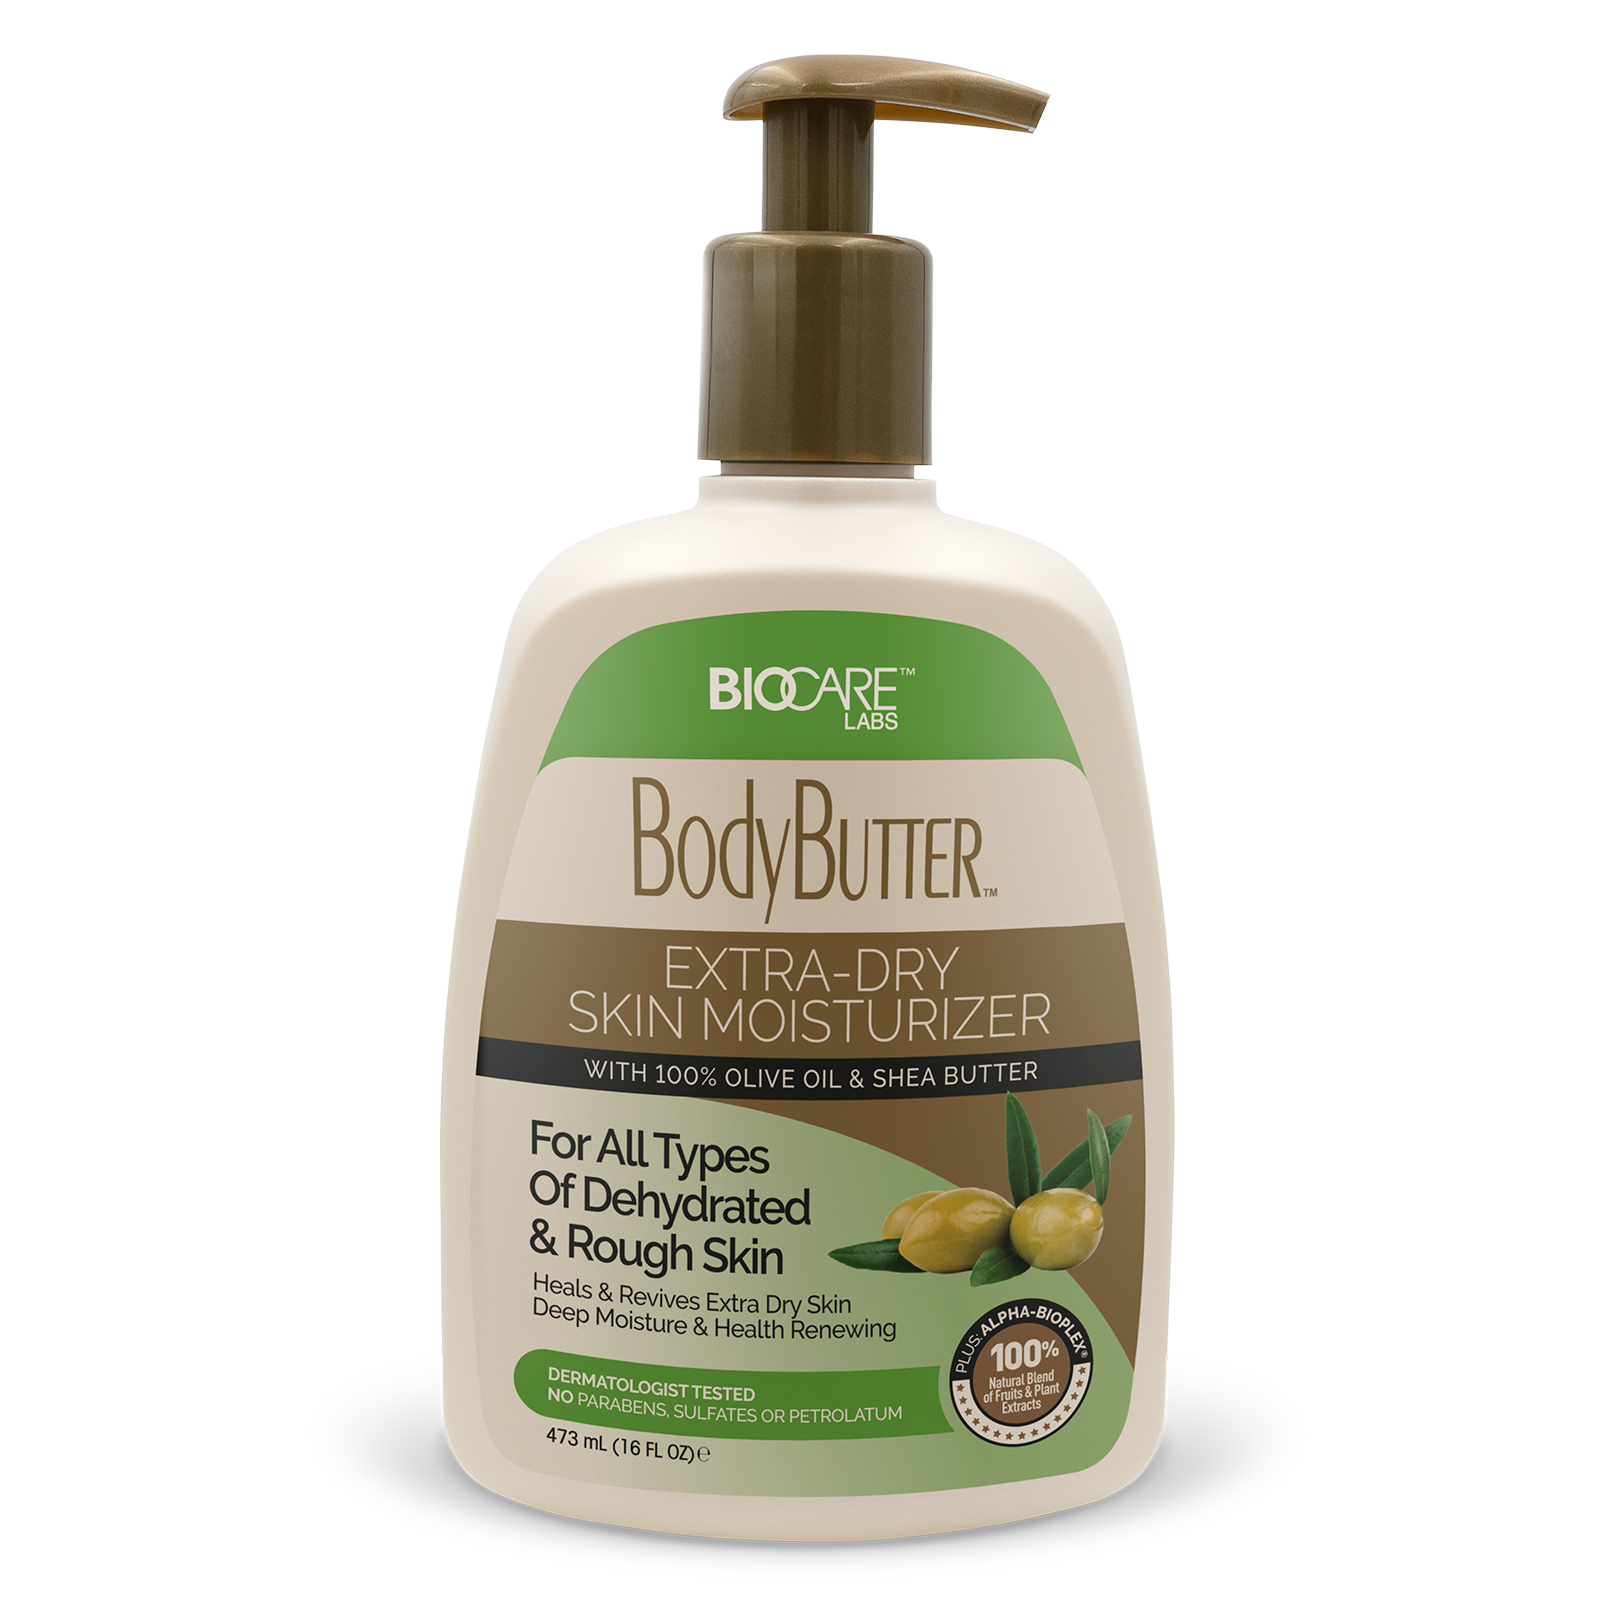 16 oz bottle of BodyButter™ With Olive Oil & Shea Butter from Biocare Labs